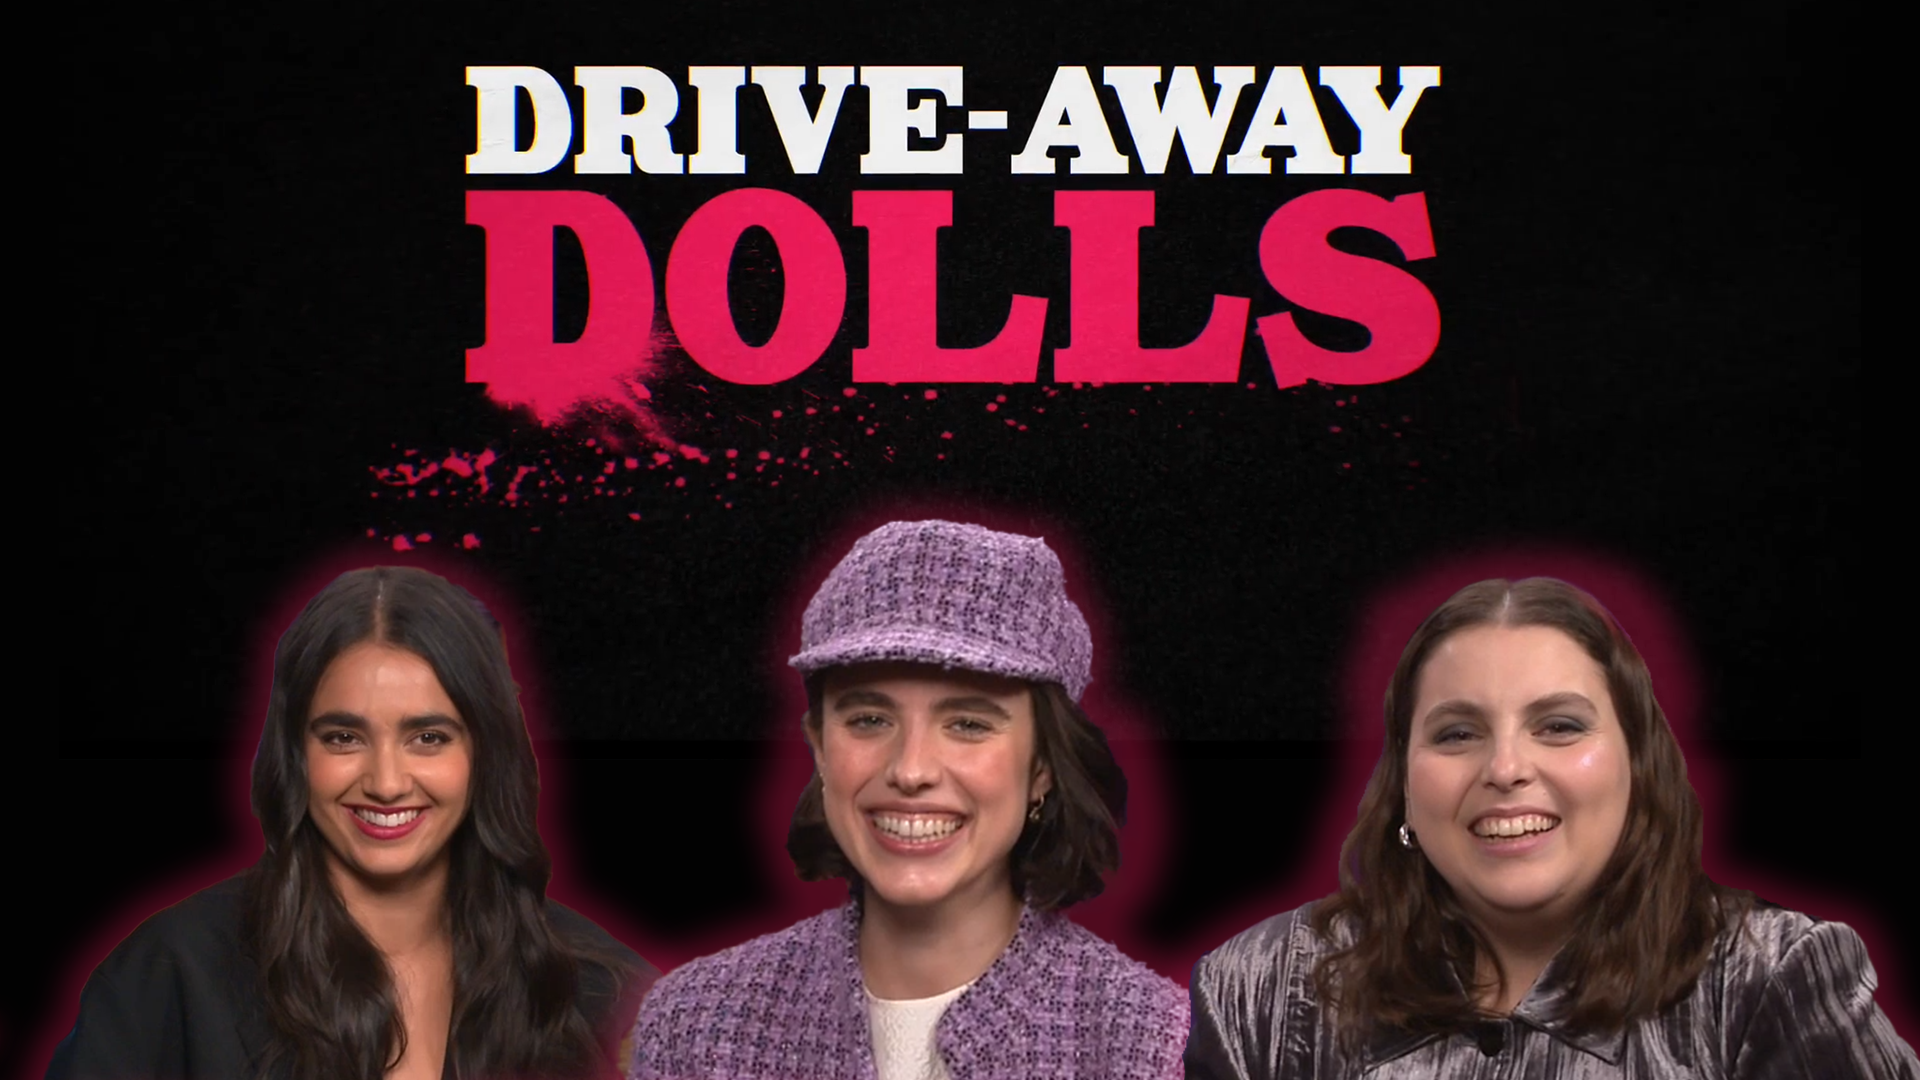 The cast of Drive-Away Dolls